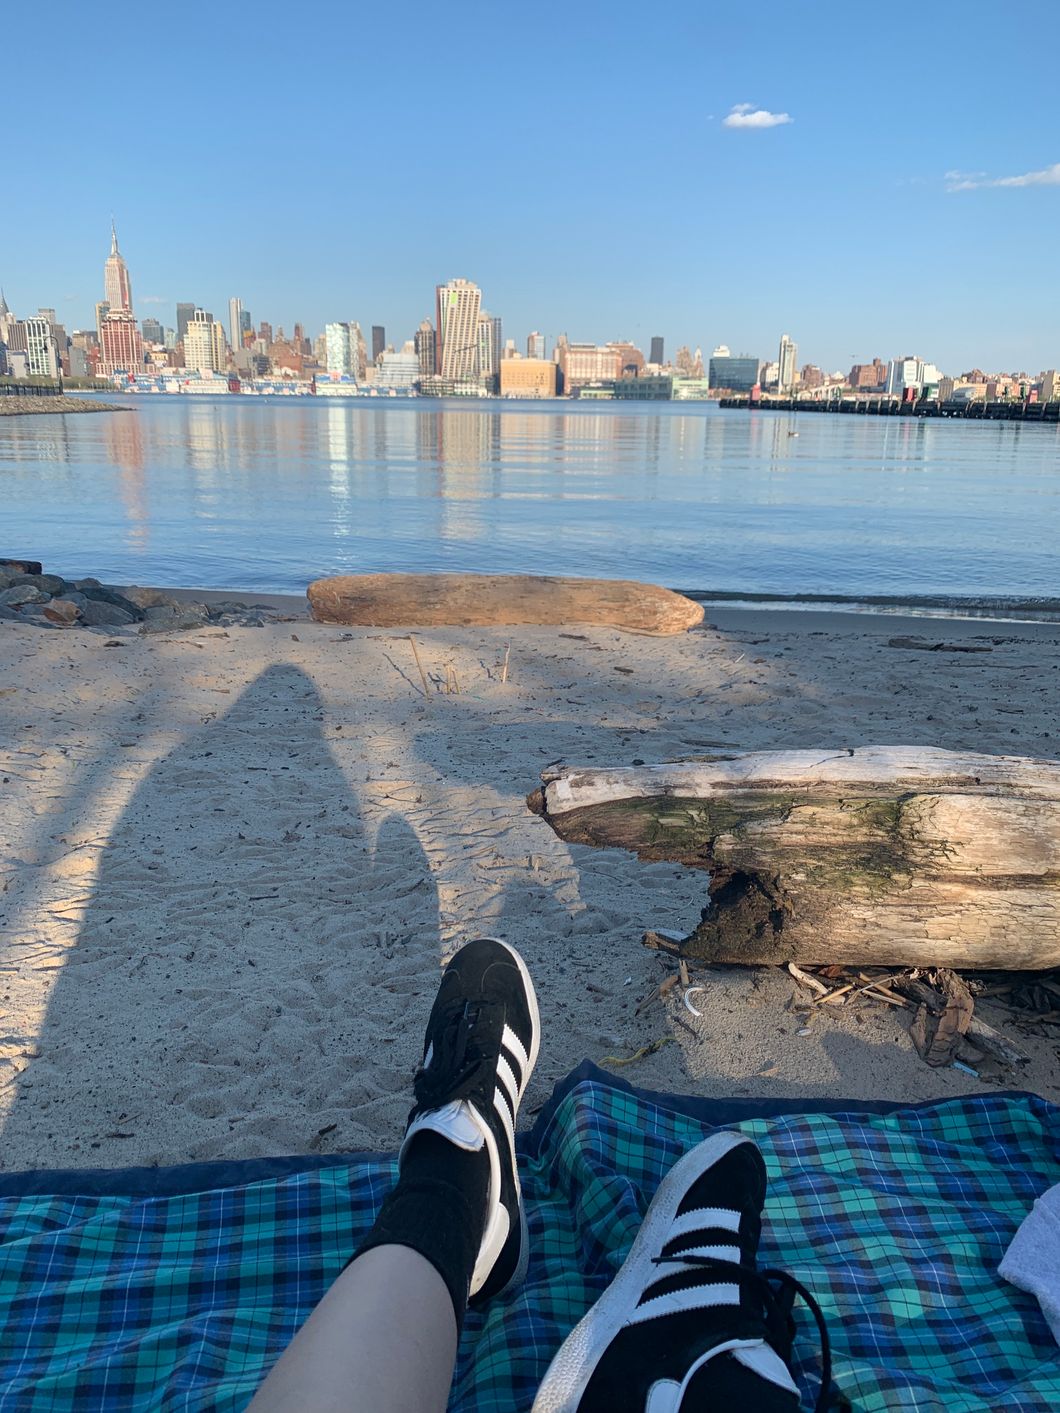 7 Ways To Make The Most Of Your 2020 Summer If You Live In Hoboken